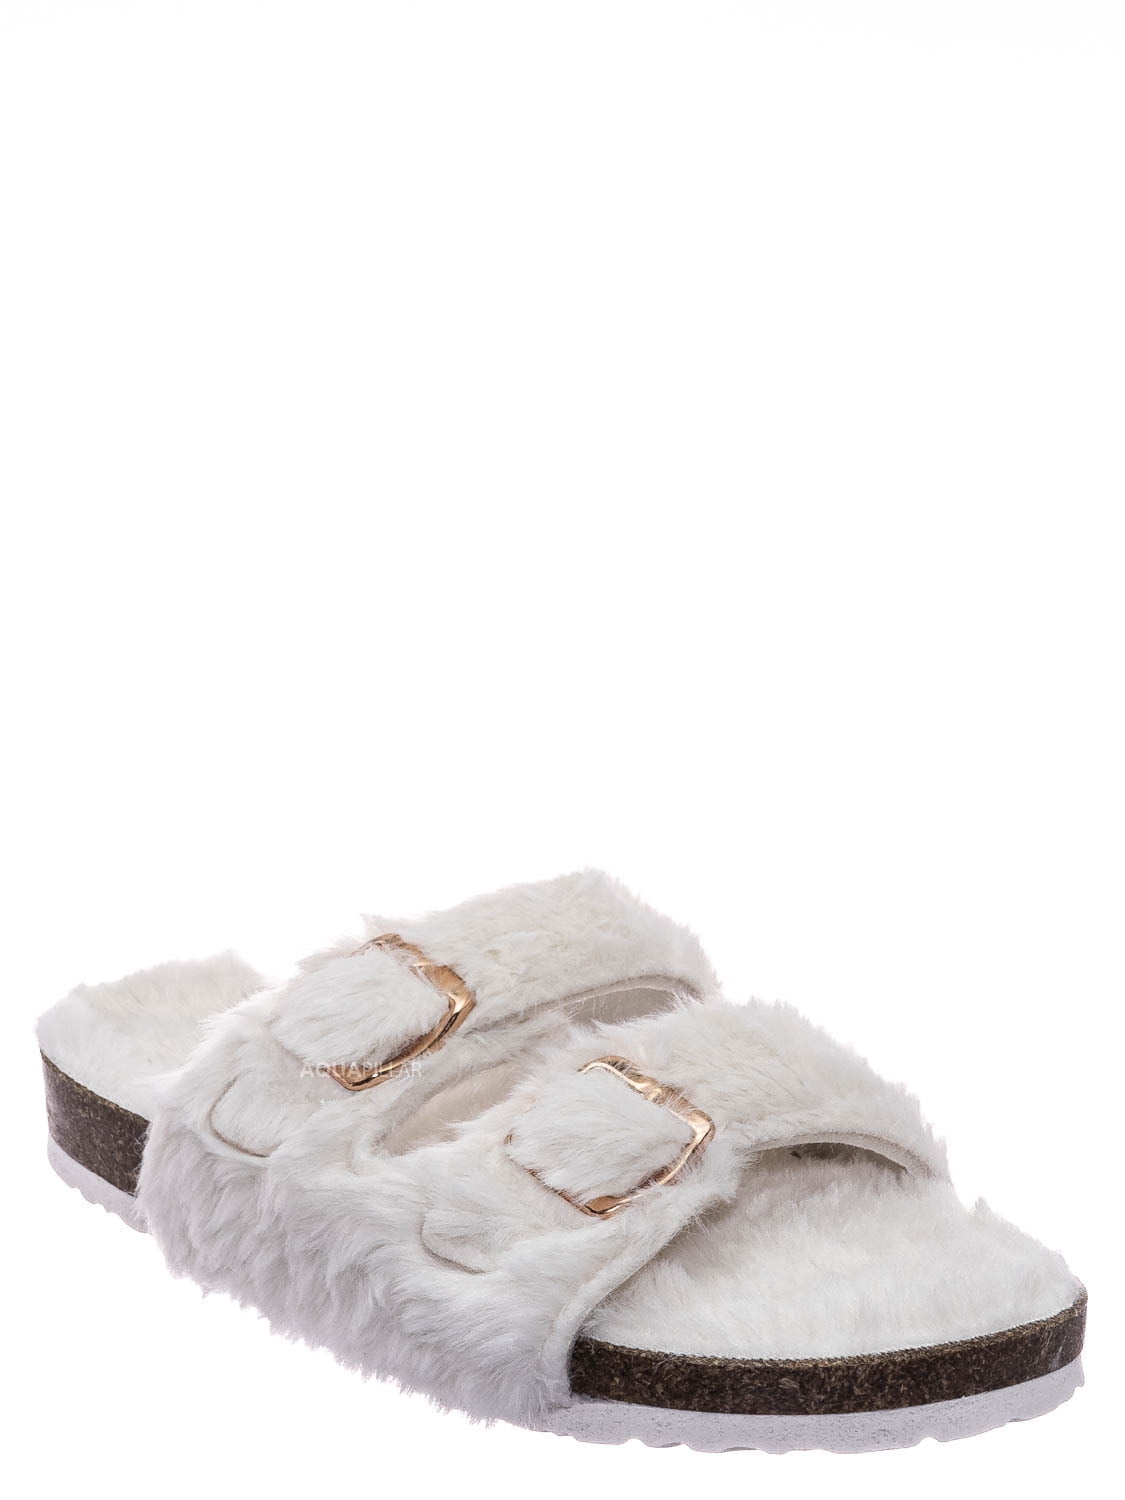 bamboo fuzzy sandals